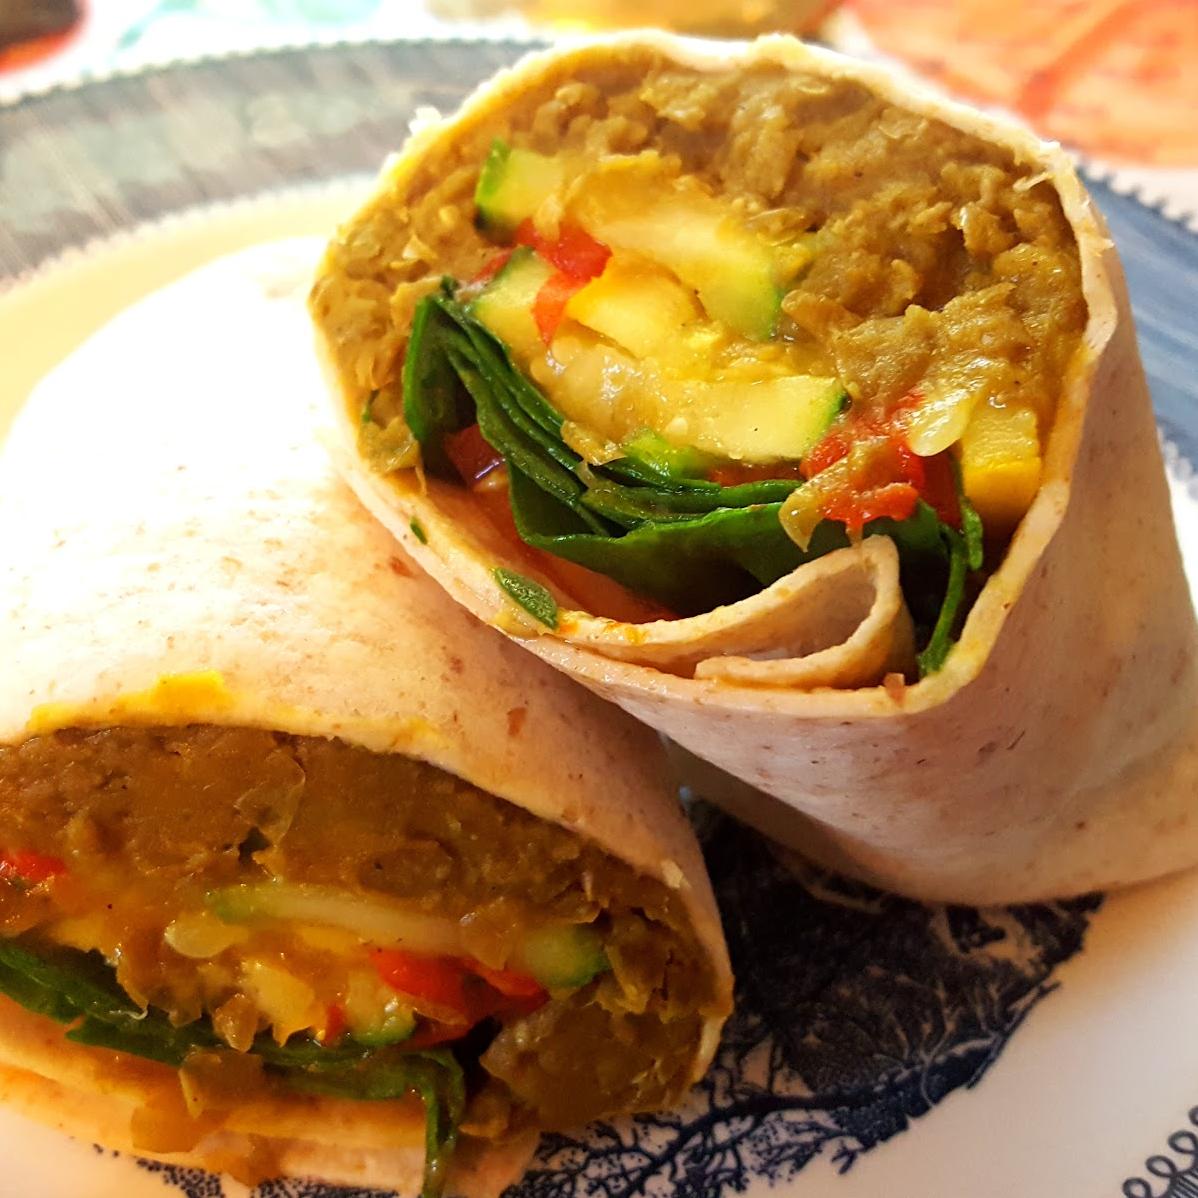  My Lentil and Roasted Vegetable Wraps are a plant-based lunch option that won't disappoint!